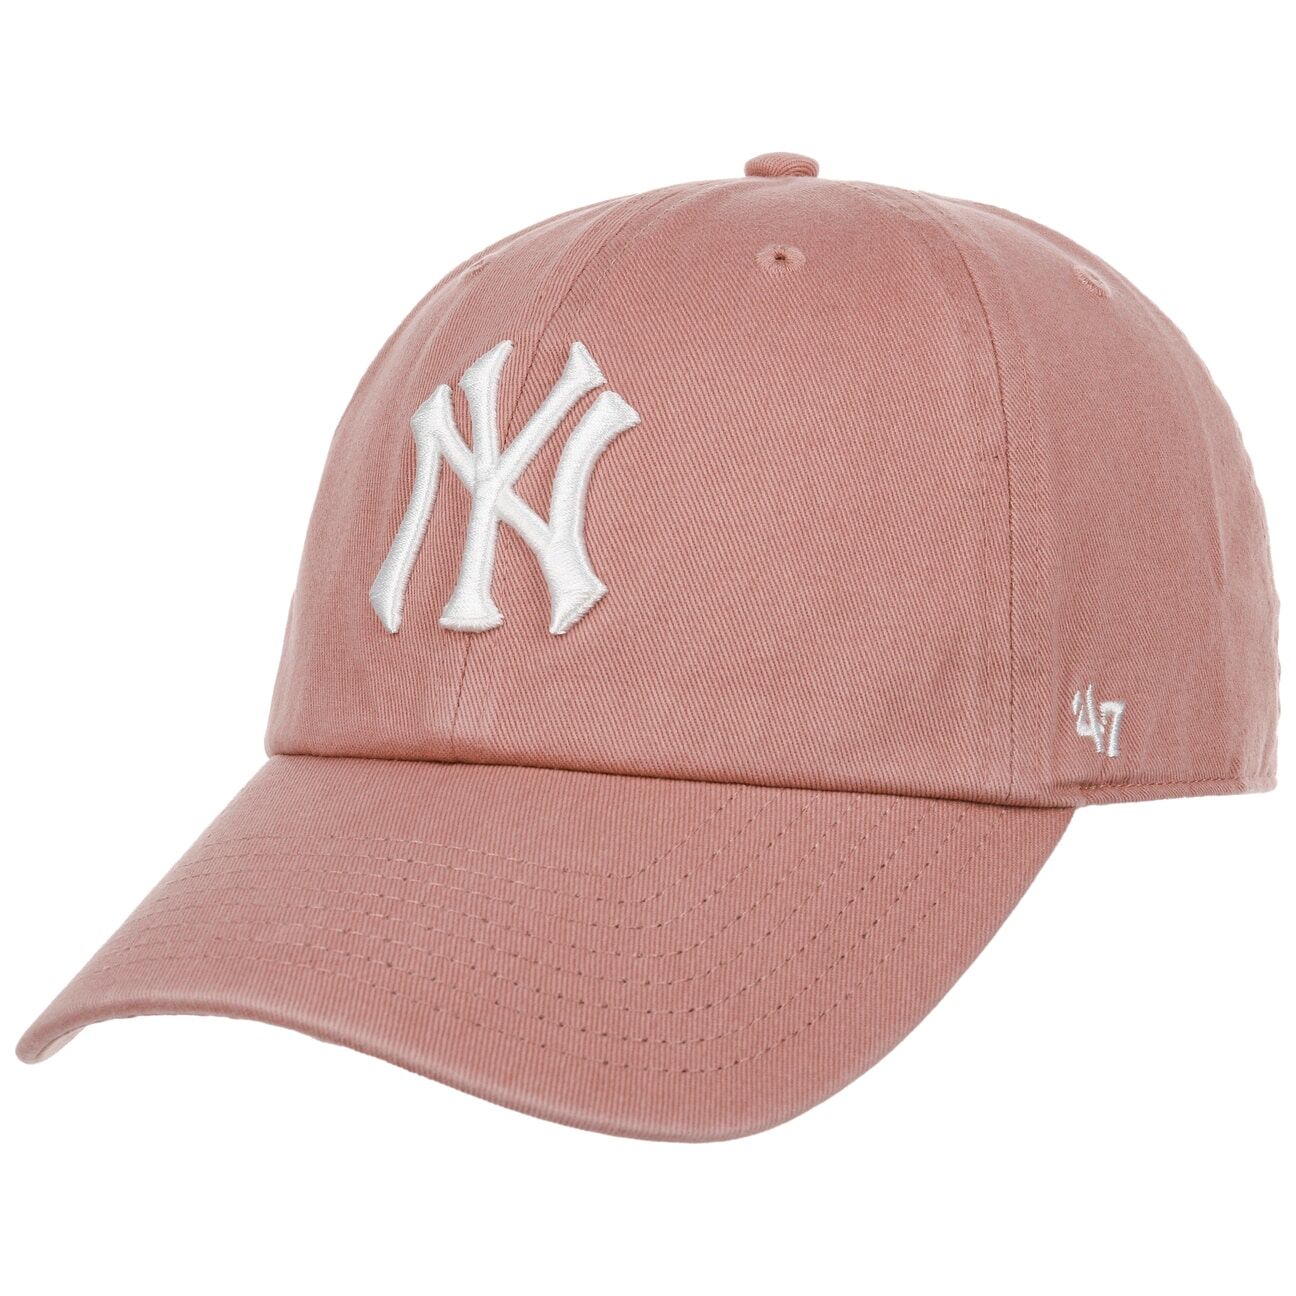 Casquette MLB New York Yankees by 47 Brand rose One Size Unisex